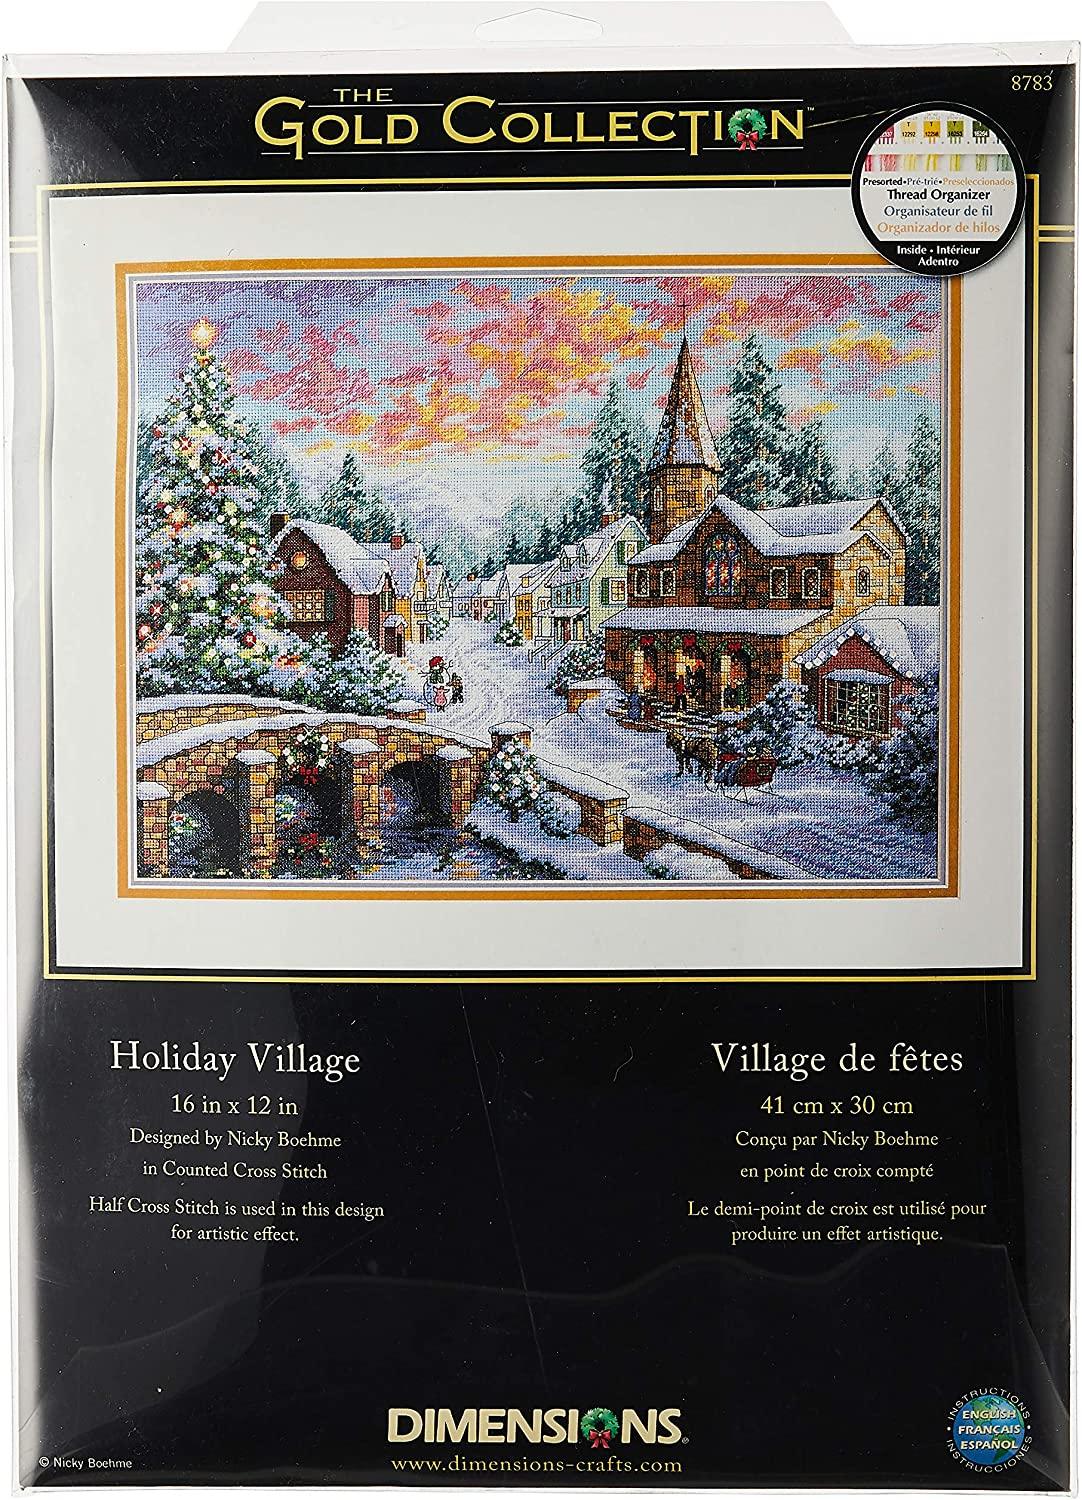 HOLIDAY VILLAGE, Counted Cross Stitch Kit, 16 count dove grey Aida, DIMENSIONS, Gold Collection (08783)